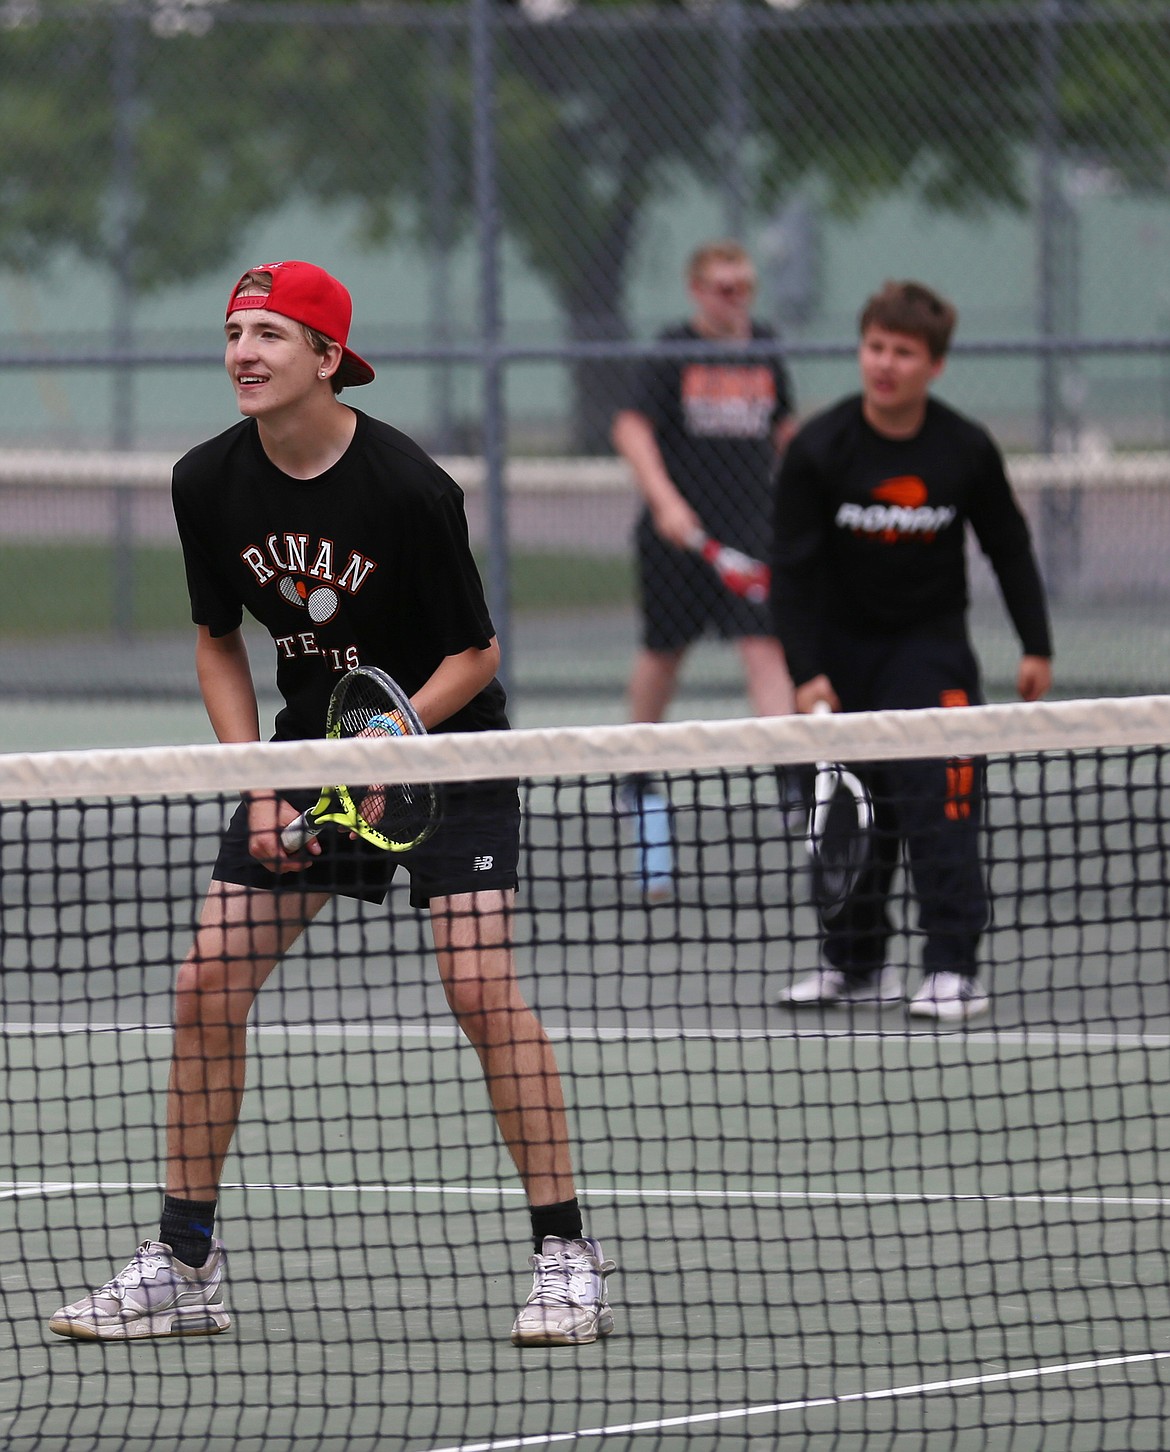 Ronan senior Remi Stalheim and sophomore Tristian Buckallew (serving) partnered for doubles action against Libby last week. (Katherine Castor photo)